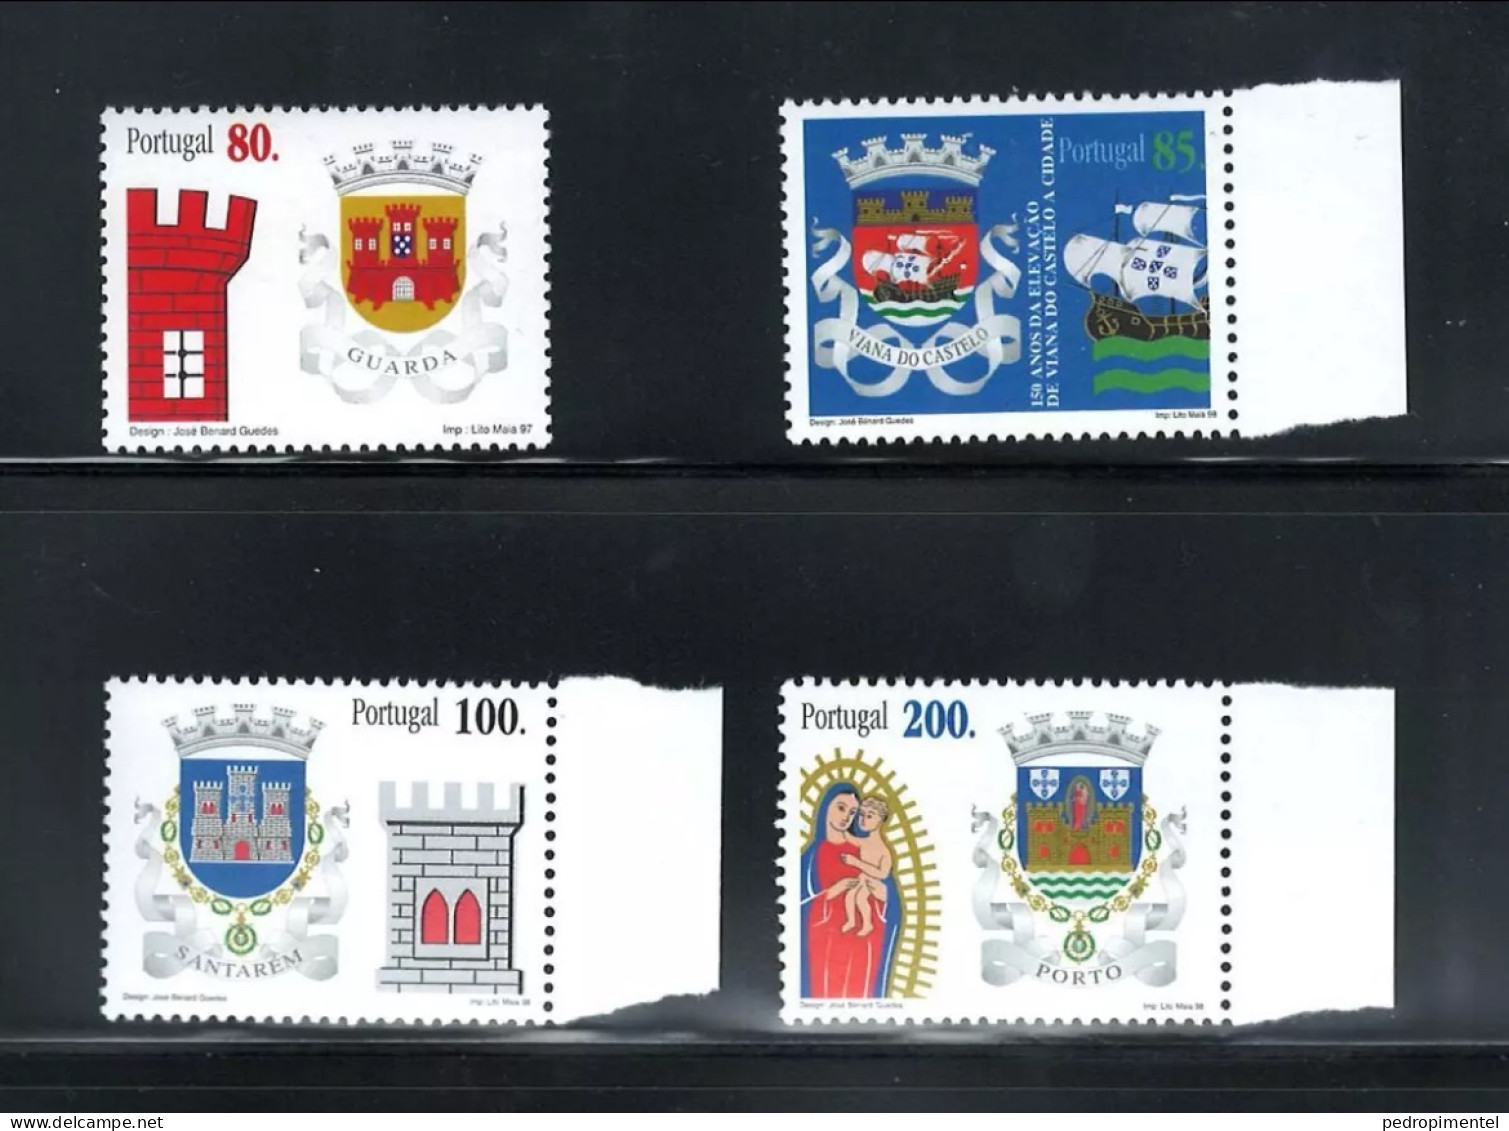 Portugal 1997 "City Crests" Condition MNH  Mundifil #2439-2444 (FDC + 4 Stamps) - Unused Stamps